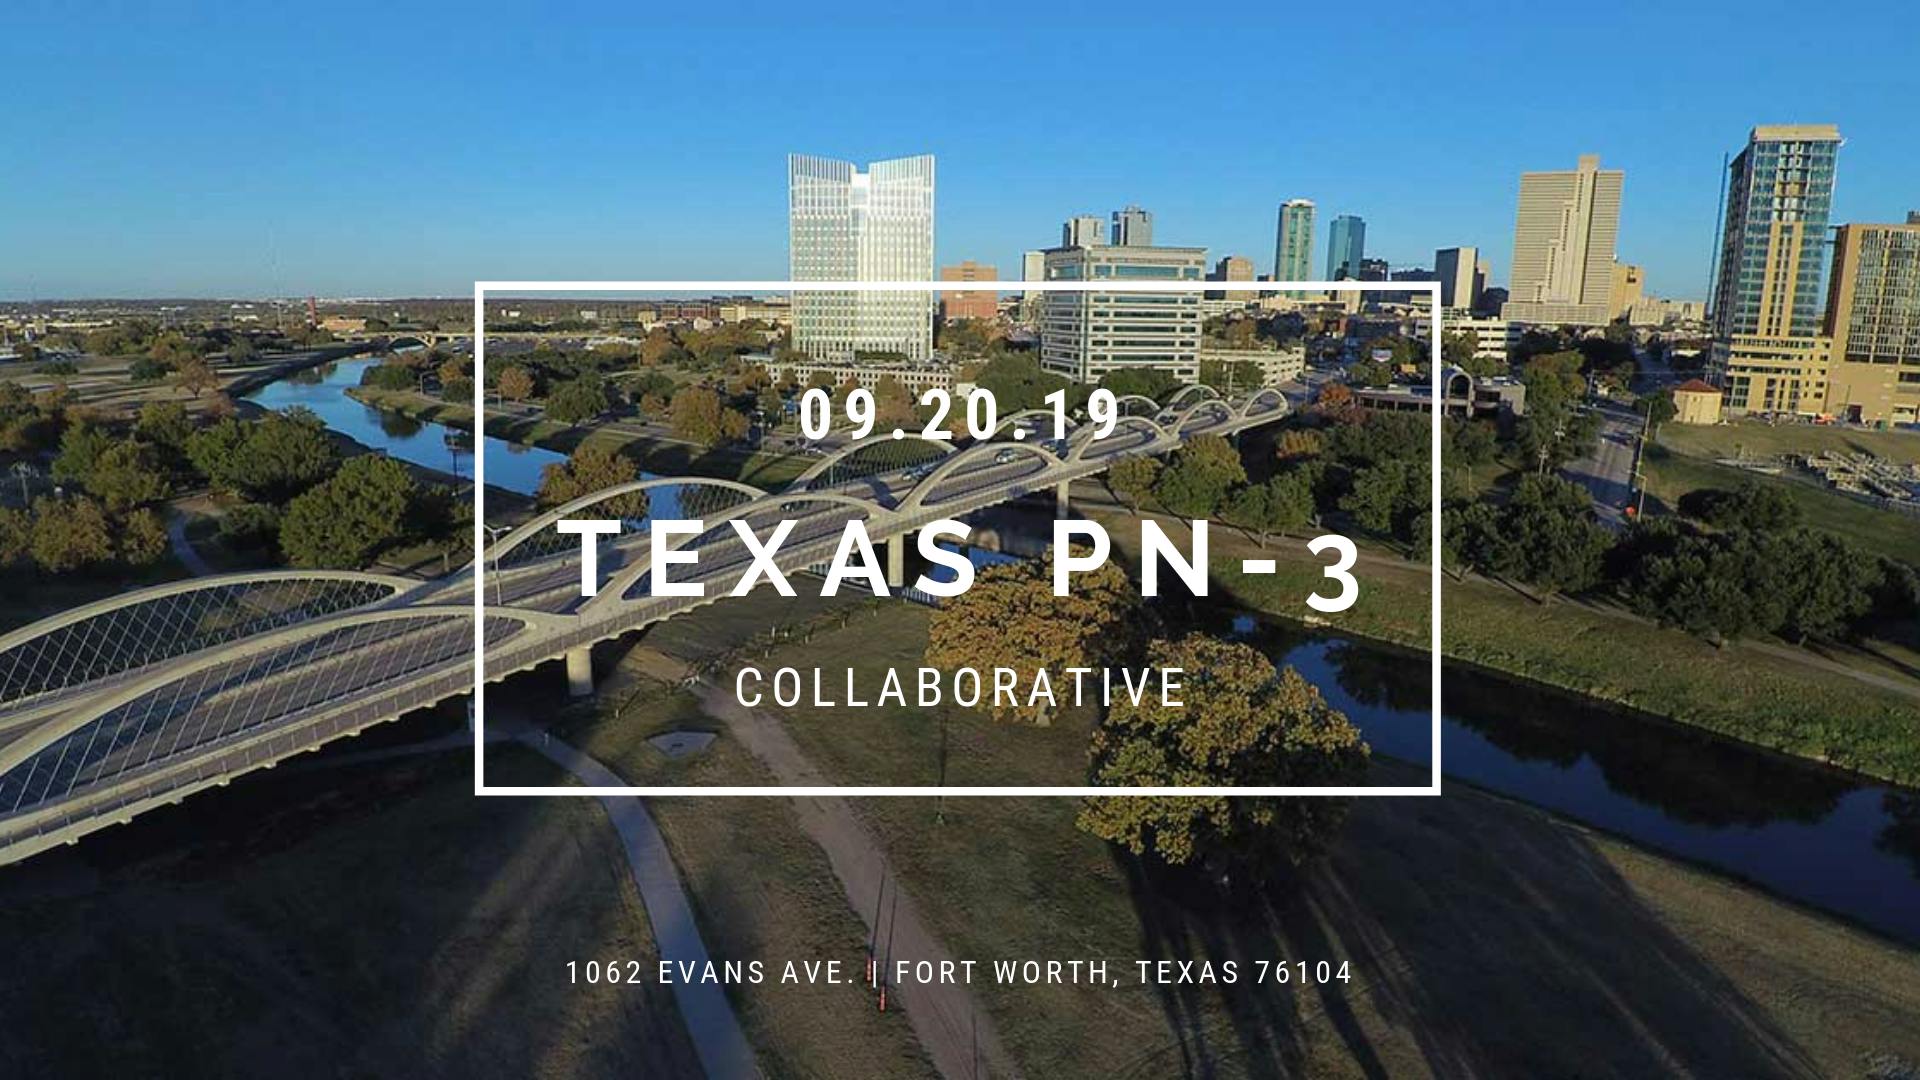 Texas PN-3 Collaborative Meeting in Fort Worth